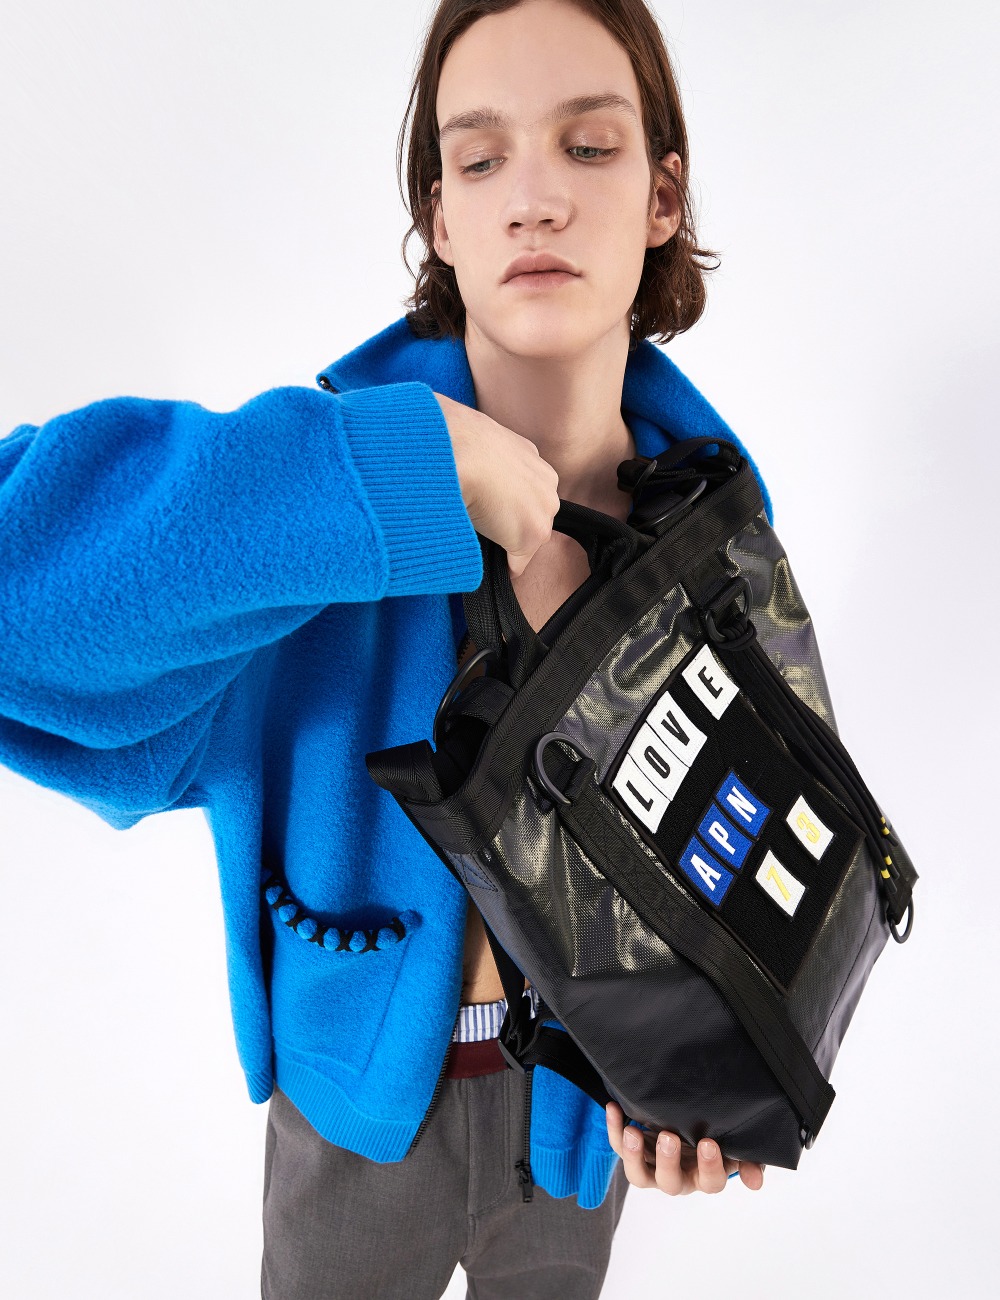 A PERSONAL NOTE AW21 LOOKBOOK